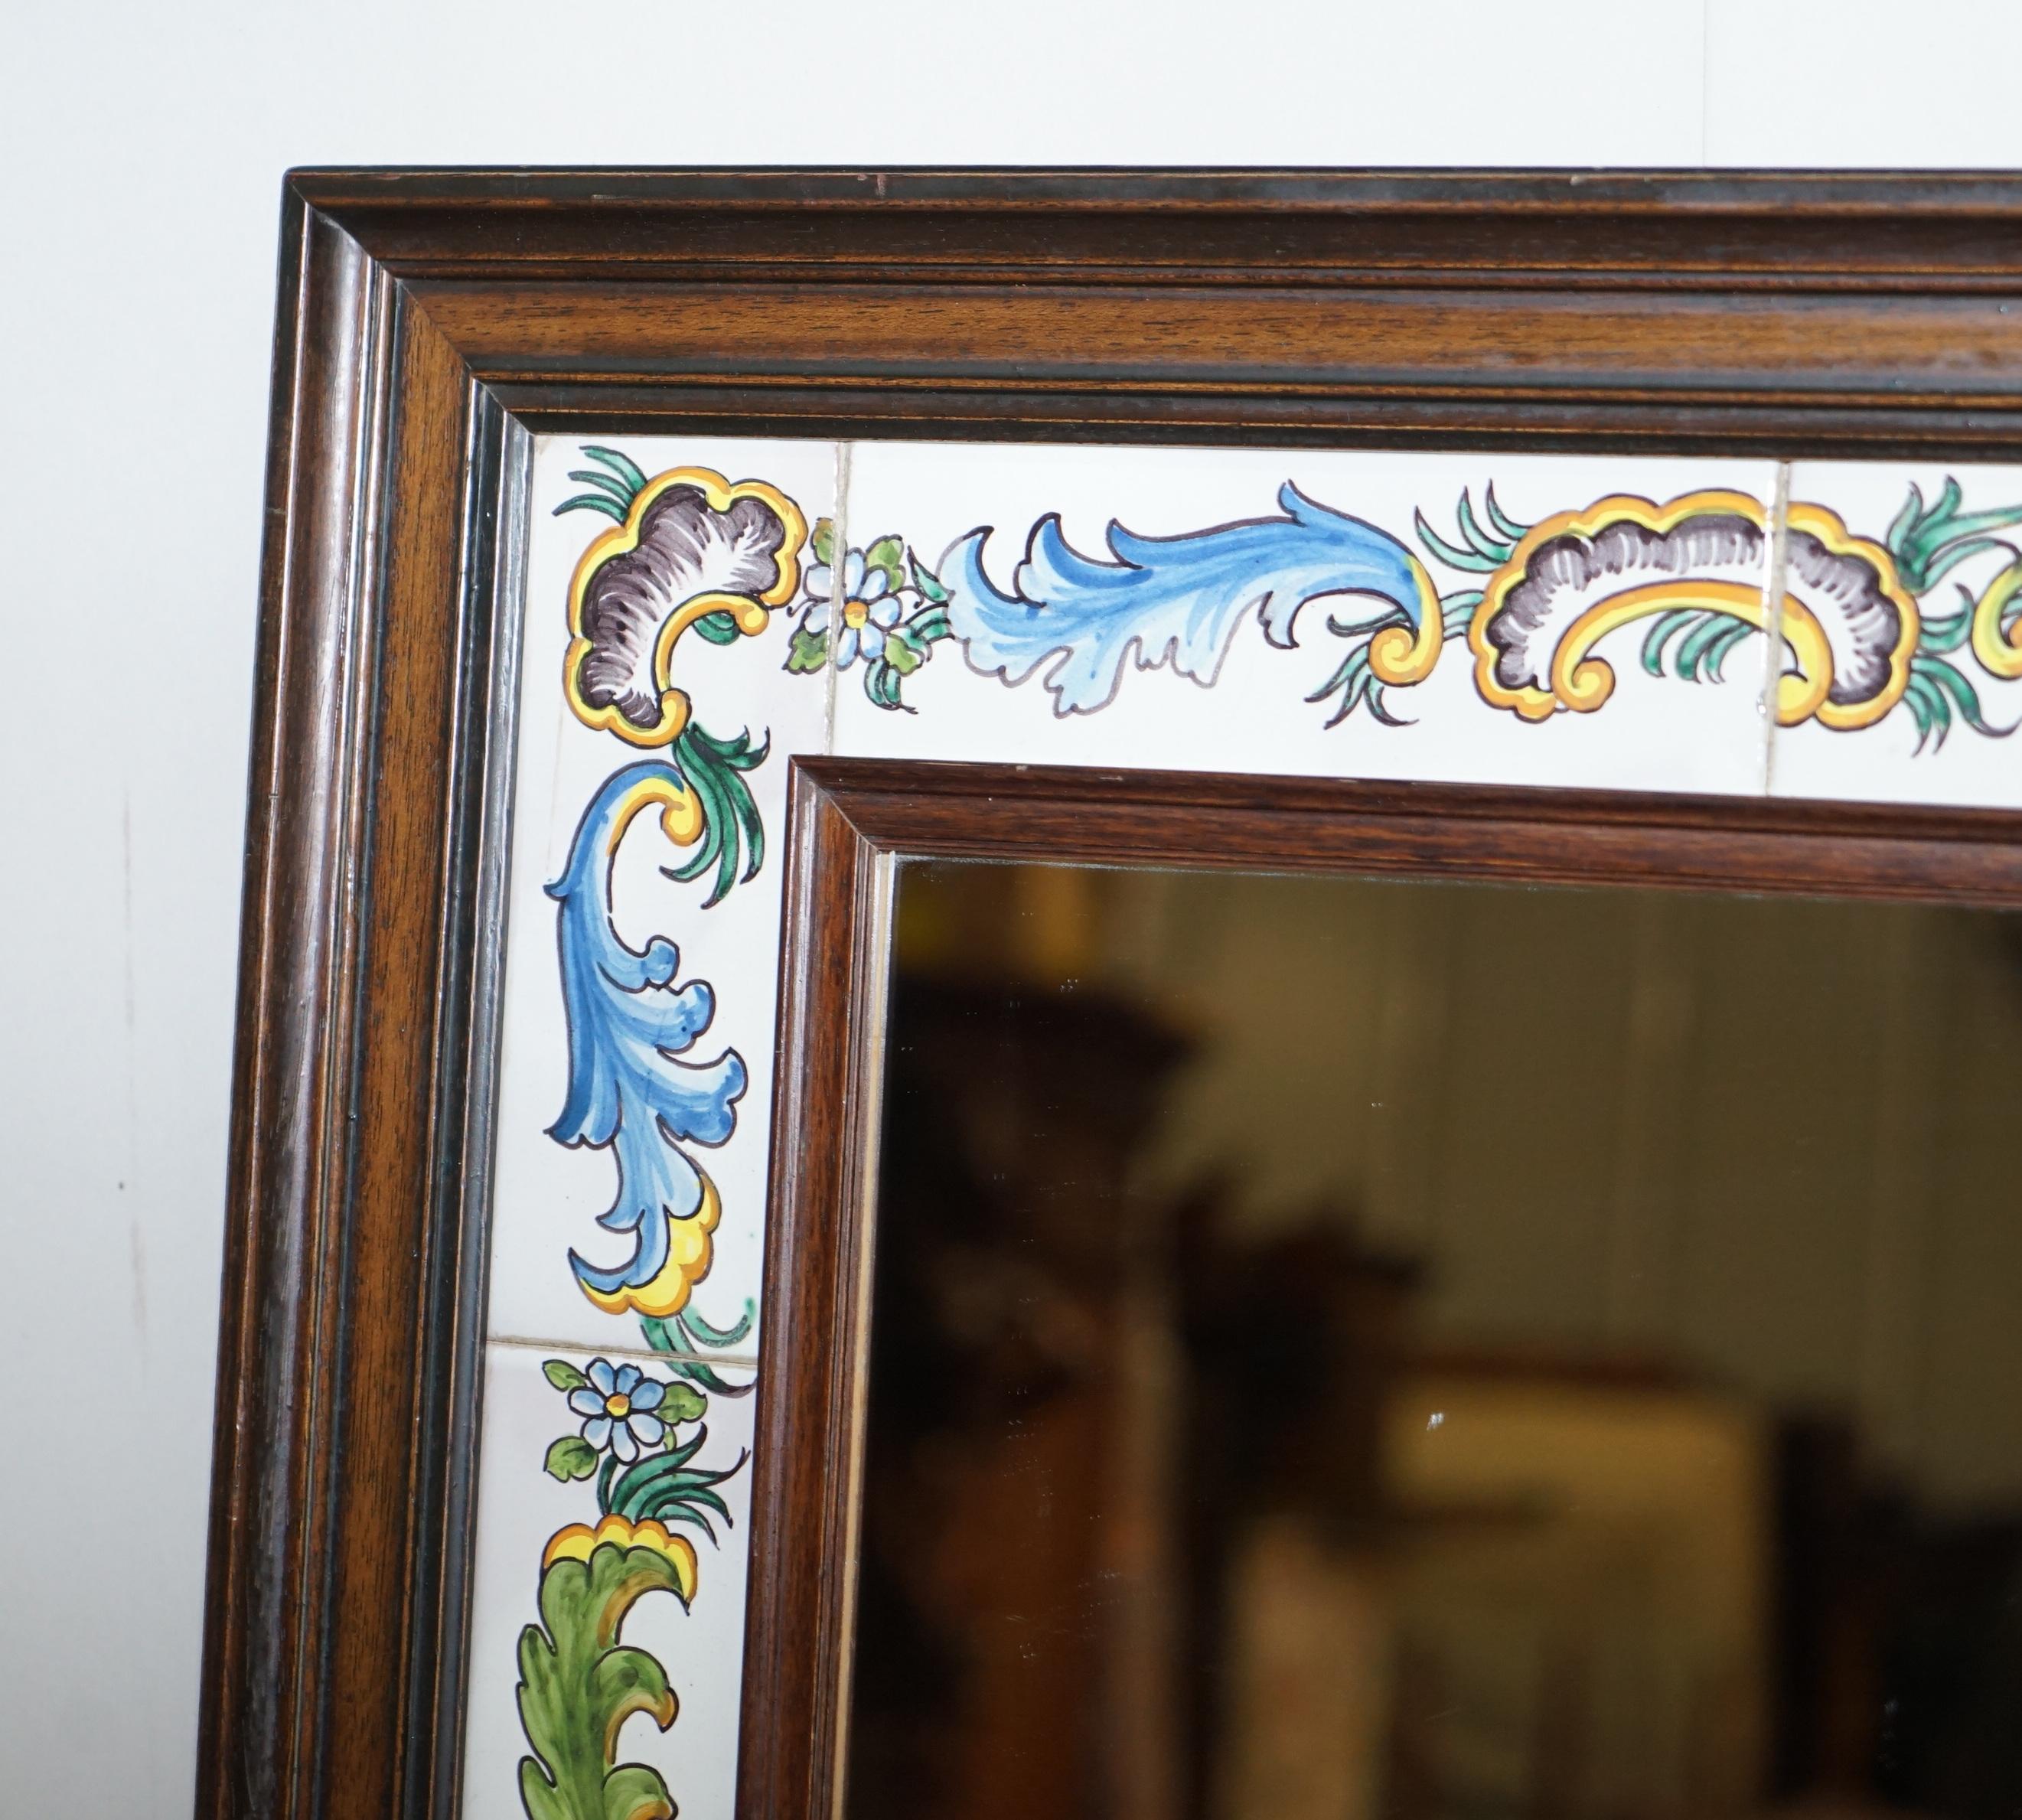 We are delighted to this nice vintage Mediterranean tiled wall mirror with hand painted tiles one of which is signed to the bottom

A good looking well-made and decorative piece, one of the tiles is signed which I can’t quite make out, the